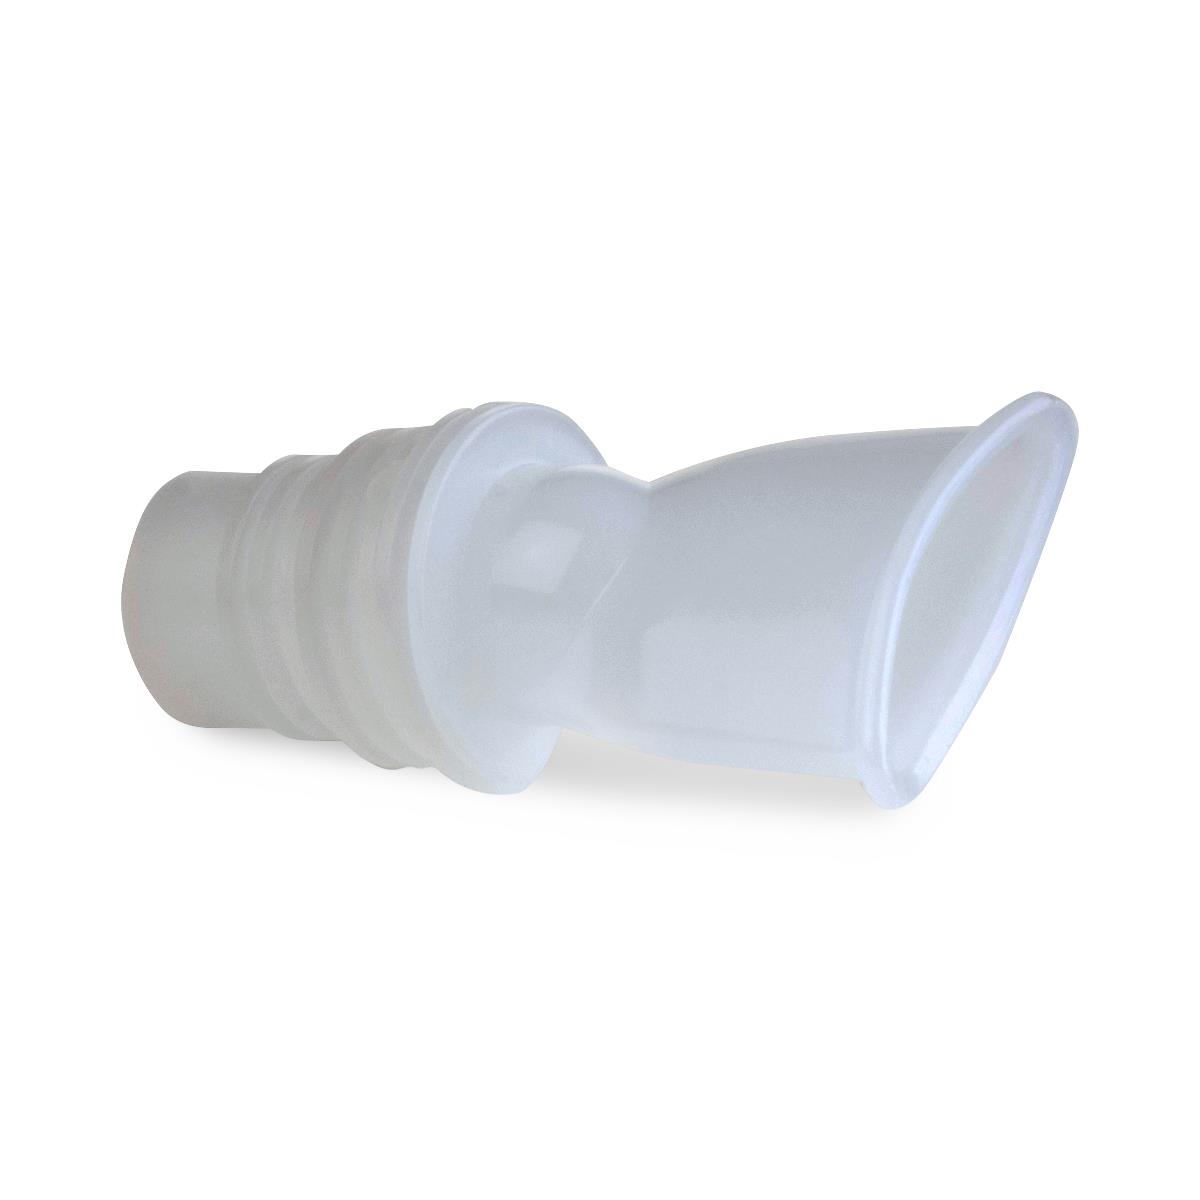 Mouthpieces for IQSpiro | Medline Industries, Inc.